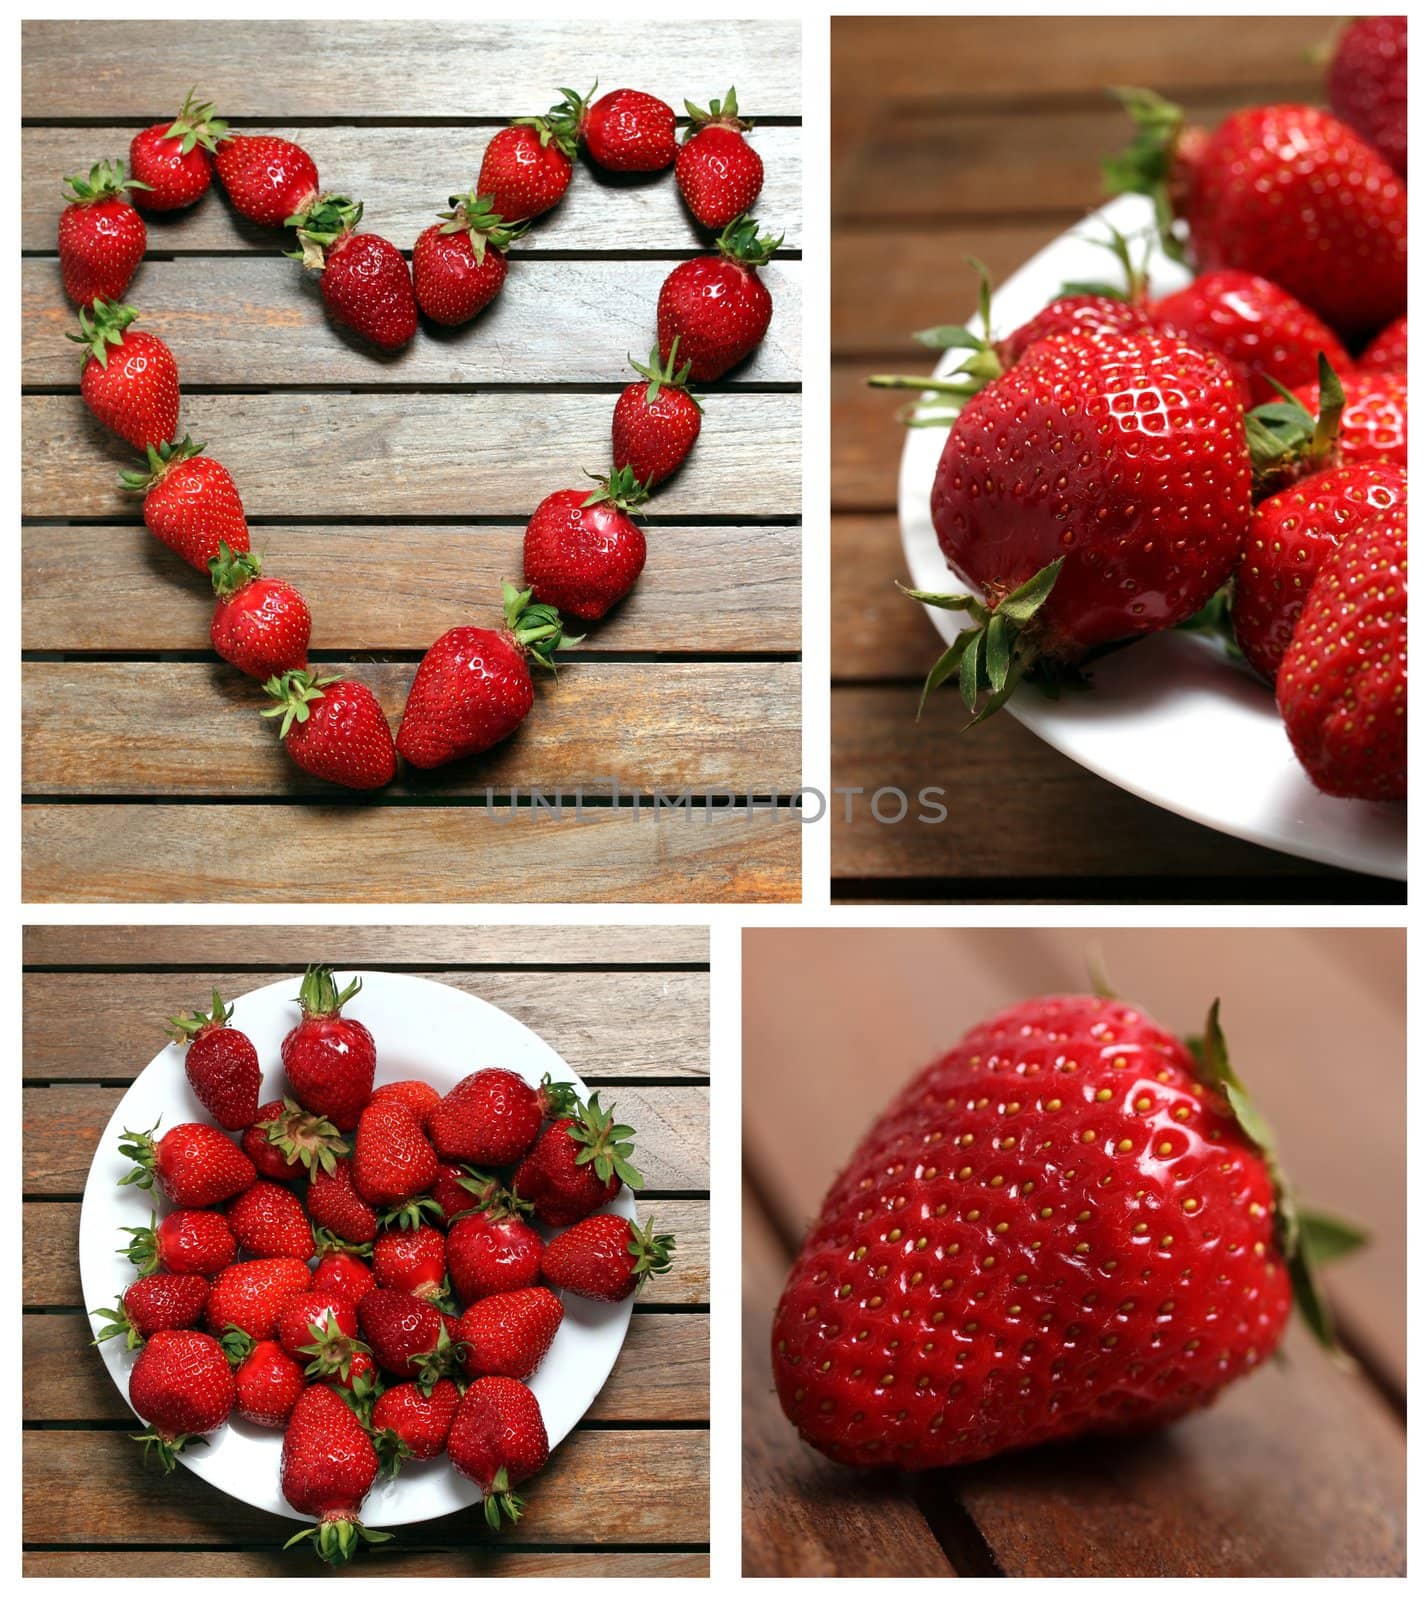 strawberries  collage by Teka77